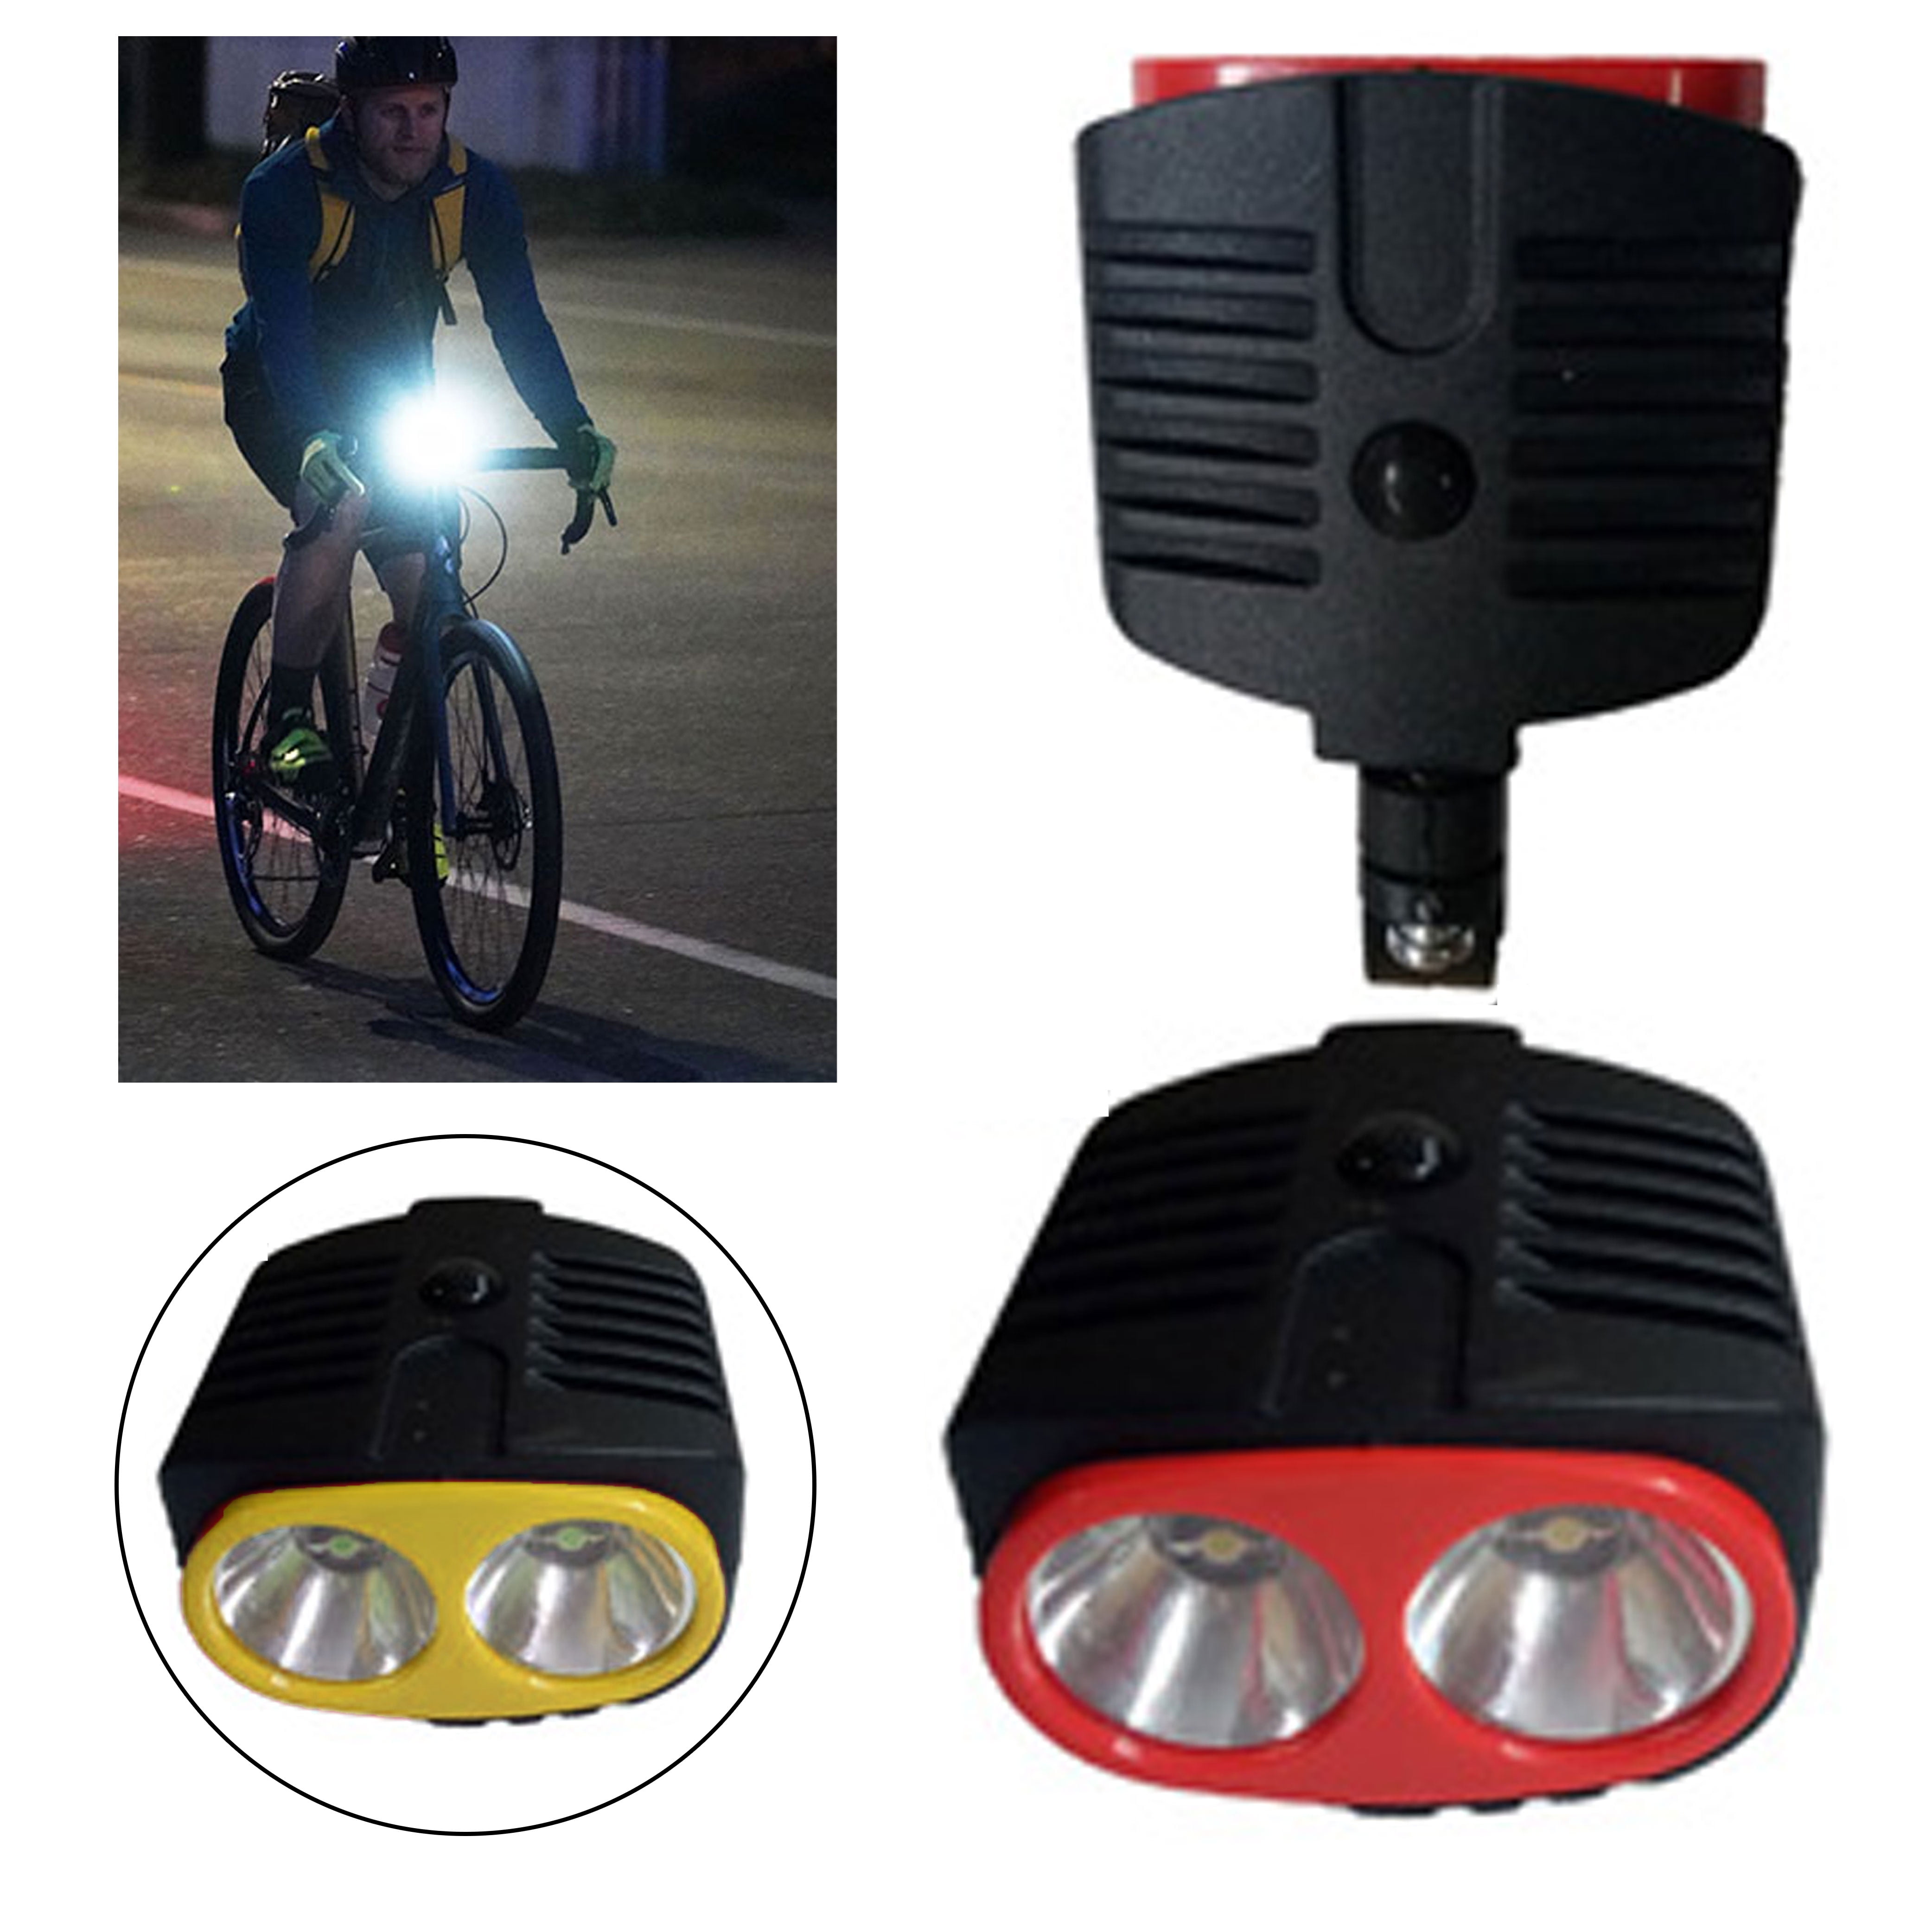 Bicycle Lights for Night Riding Battery Powered Bicycle 2pc USB Tail Rechargeable Modes 4 Rear Bike Front Light Lamp LED Cycling Bicycle Light Red, One Size 